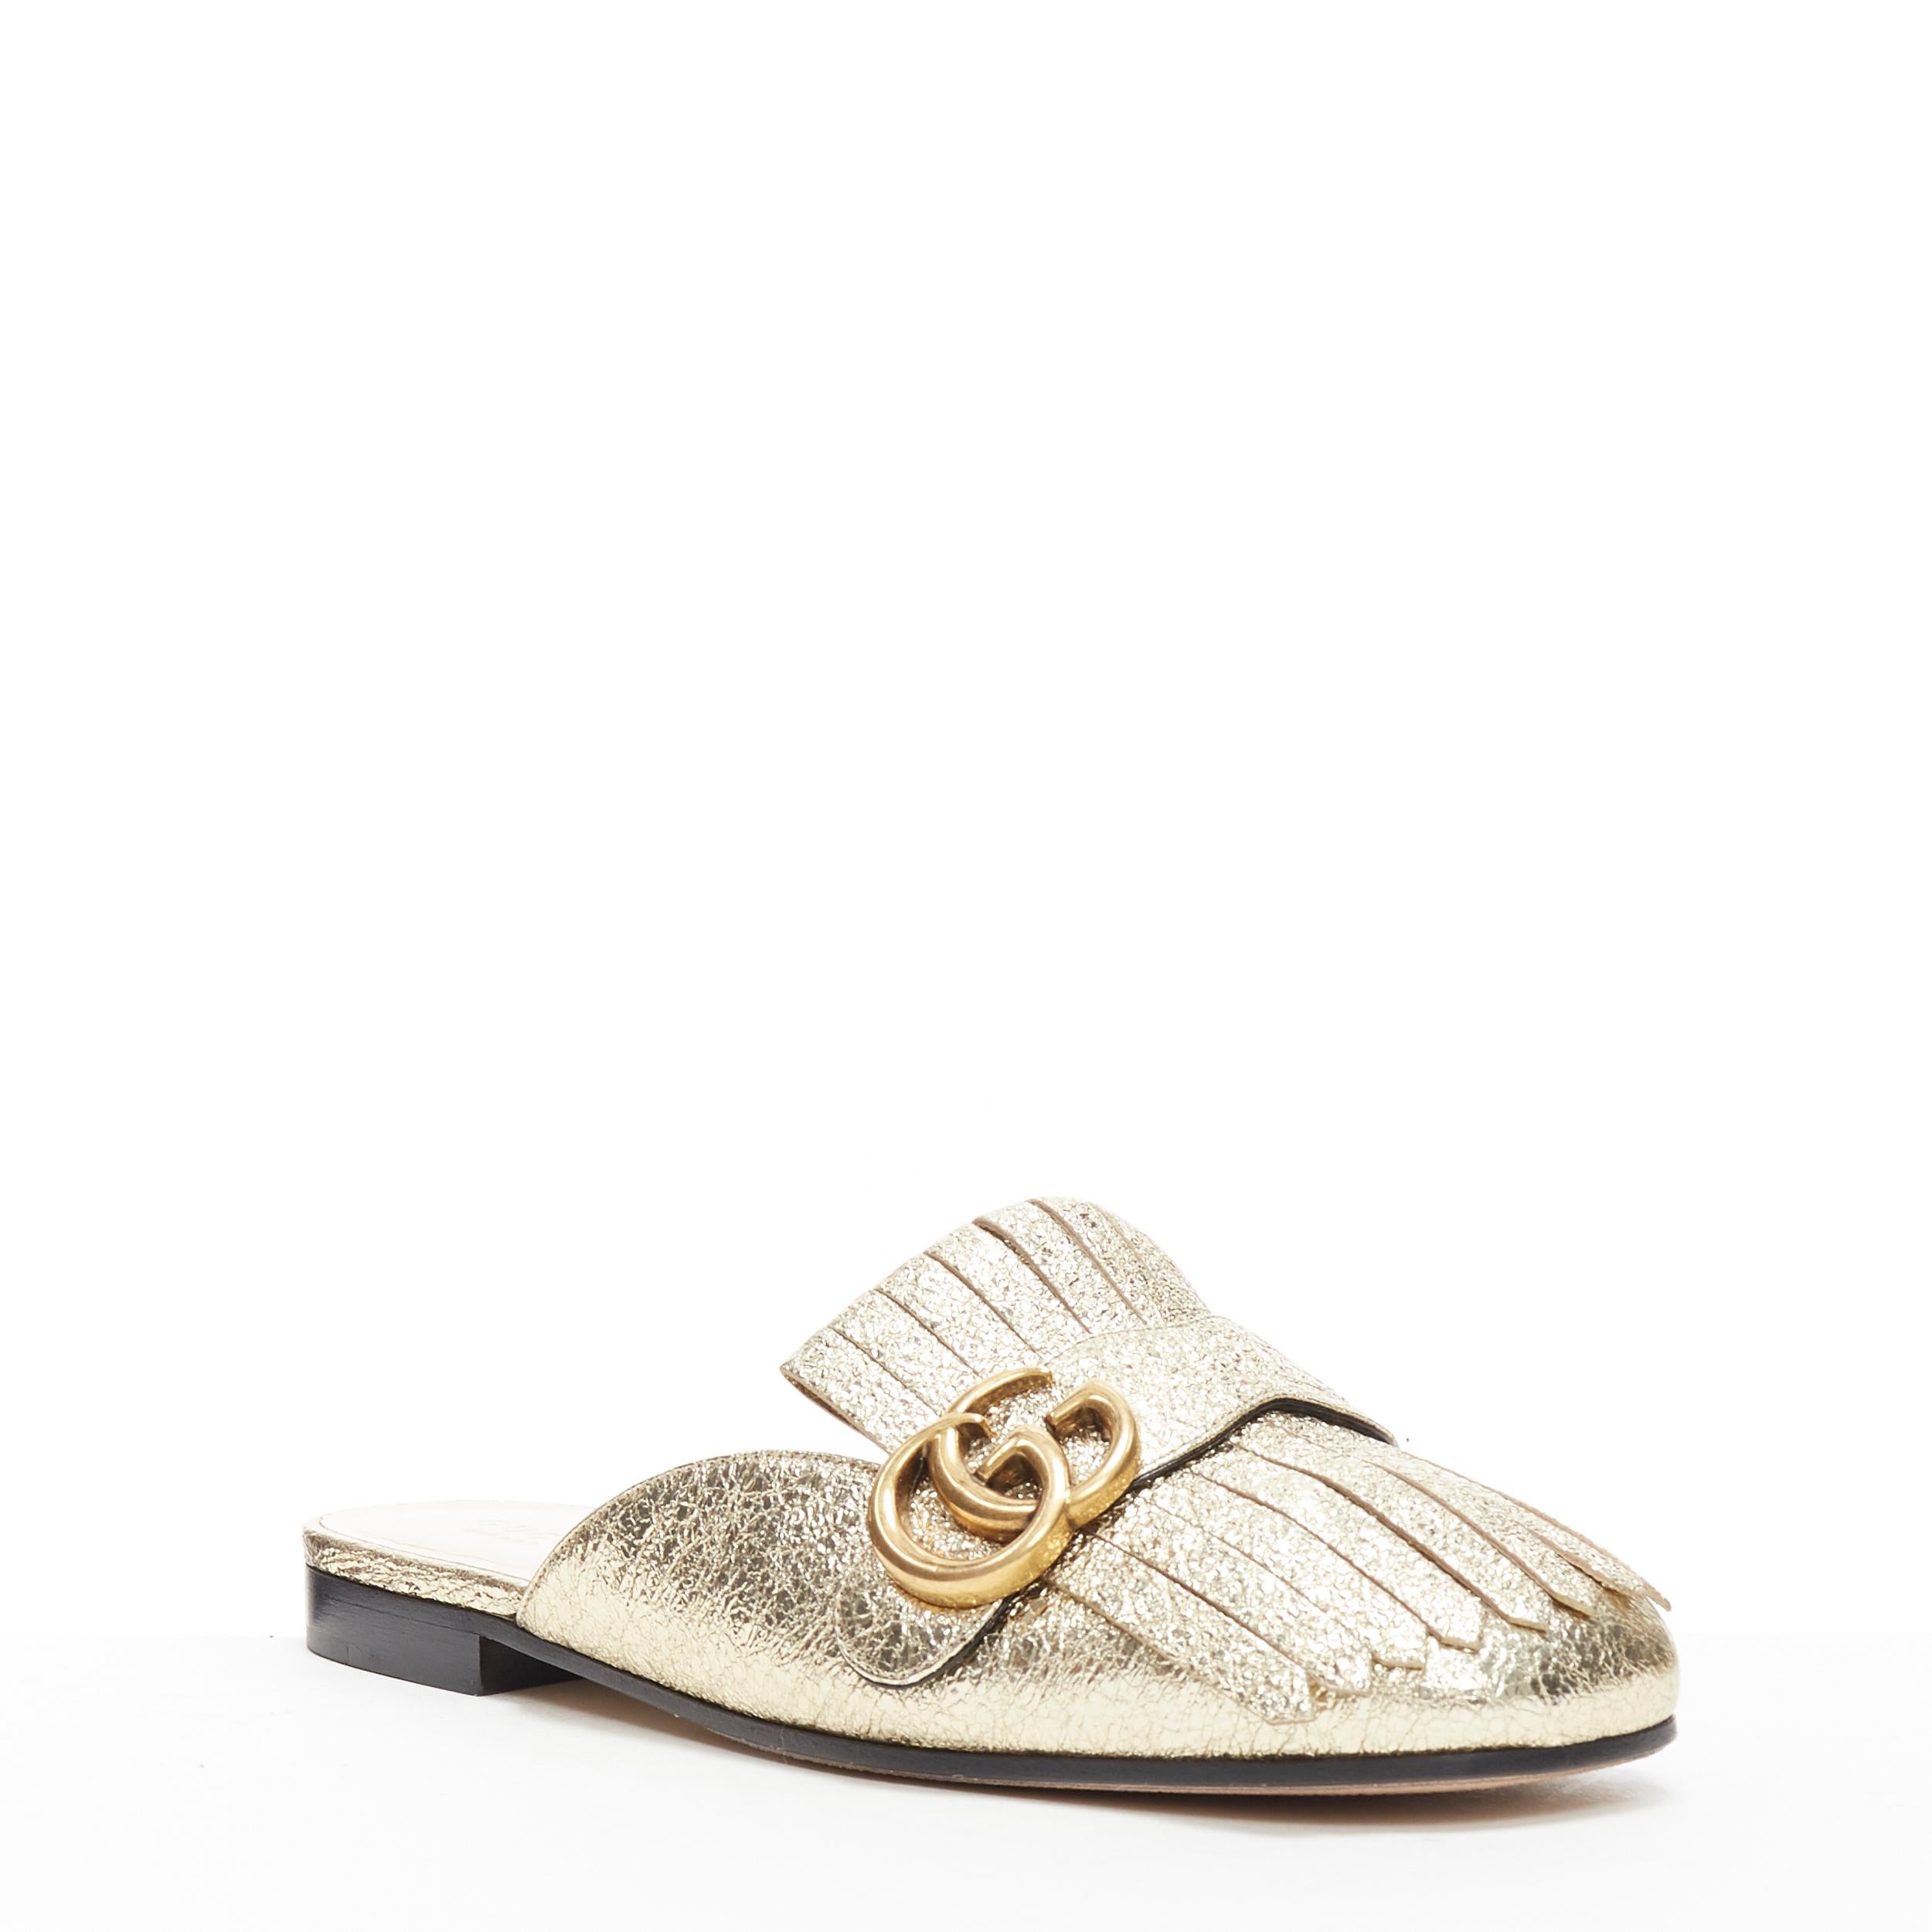 new GUCCI Marmont Platino metallic gold GG buckle fringed slip on loafers EU36.5
Brand: Gucci
Designer: Alessandro Michele
Model Name / Style: Marmont
Material: Leather
Color: Gold
Pattern: Solid
Closure: Slip on
Extra Detail: Flat (Under 1 in) heel